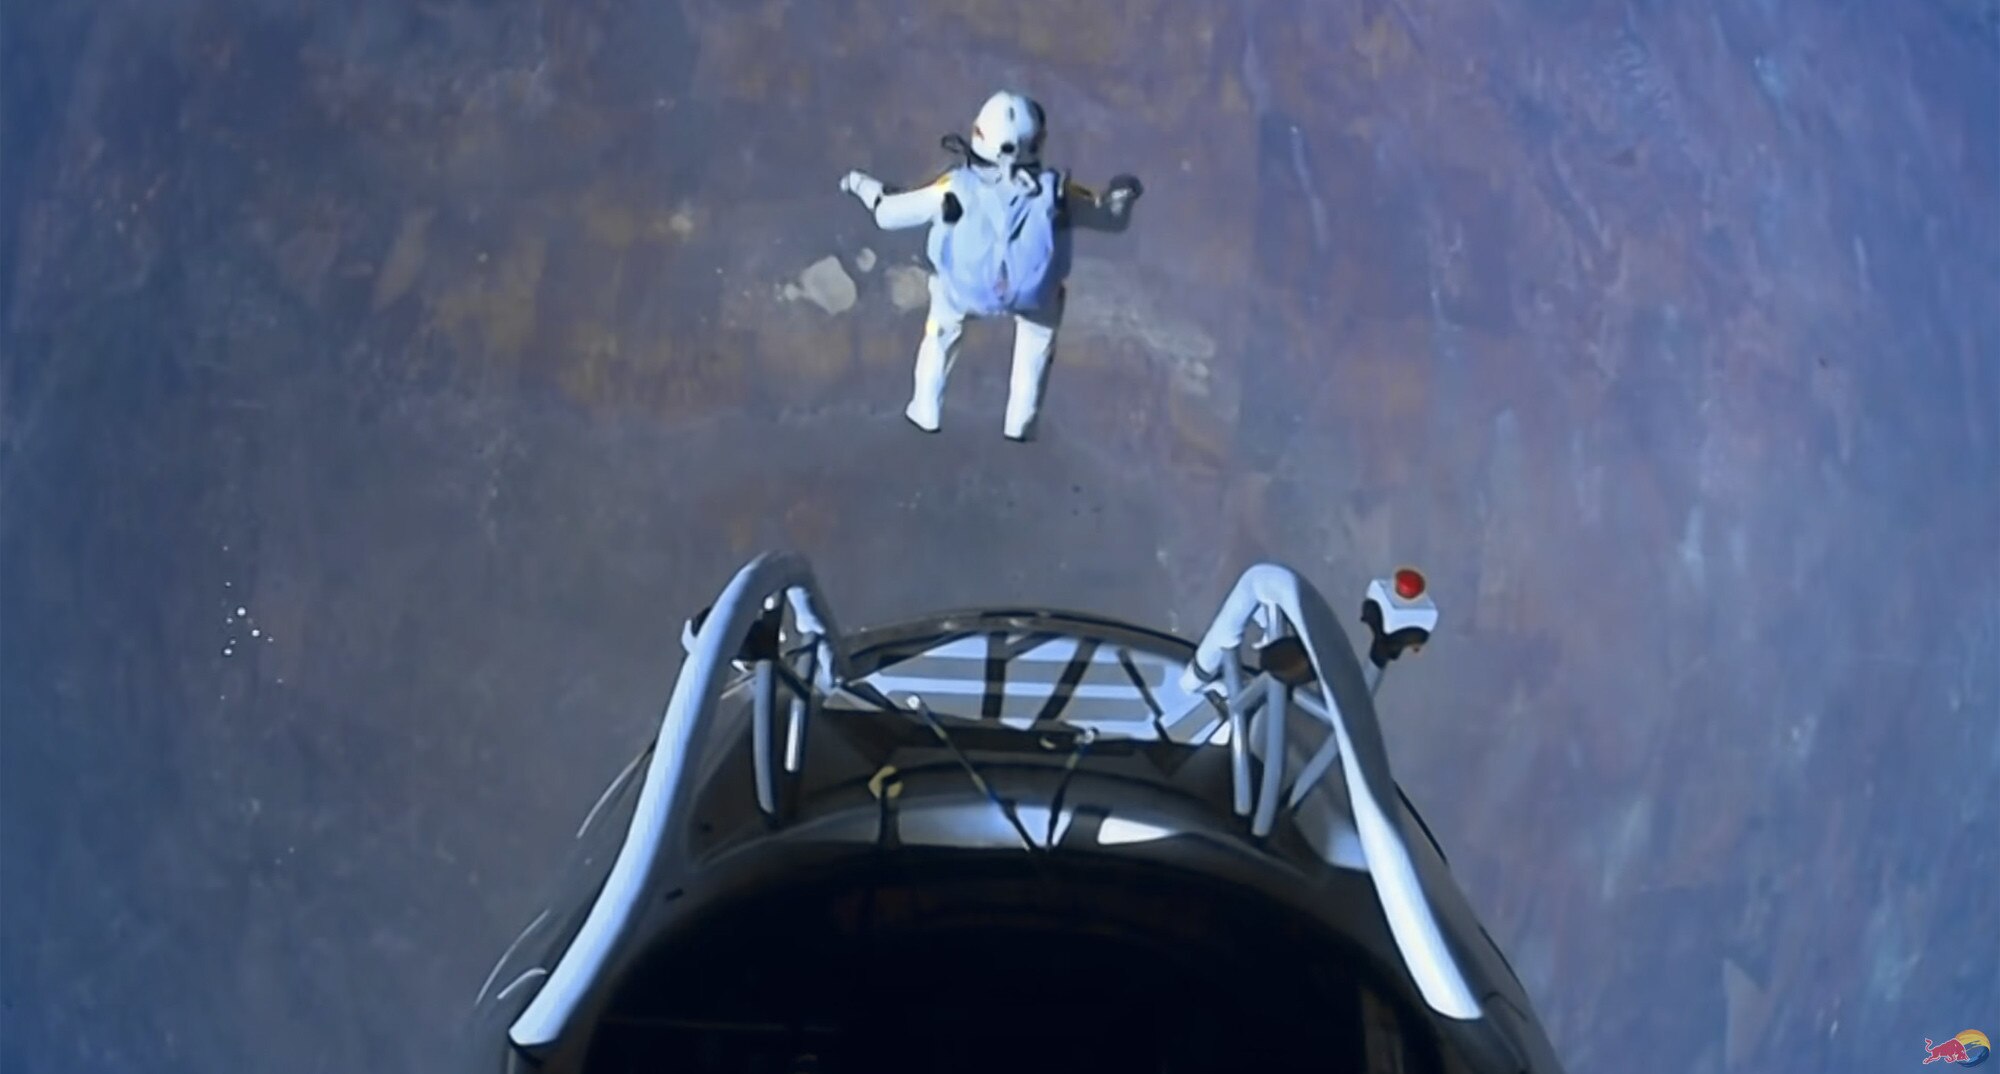 Felix Baumgartner jumps from nearly 40 km in the air. Credit: Red Bull